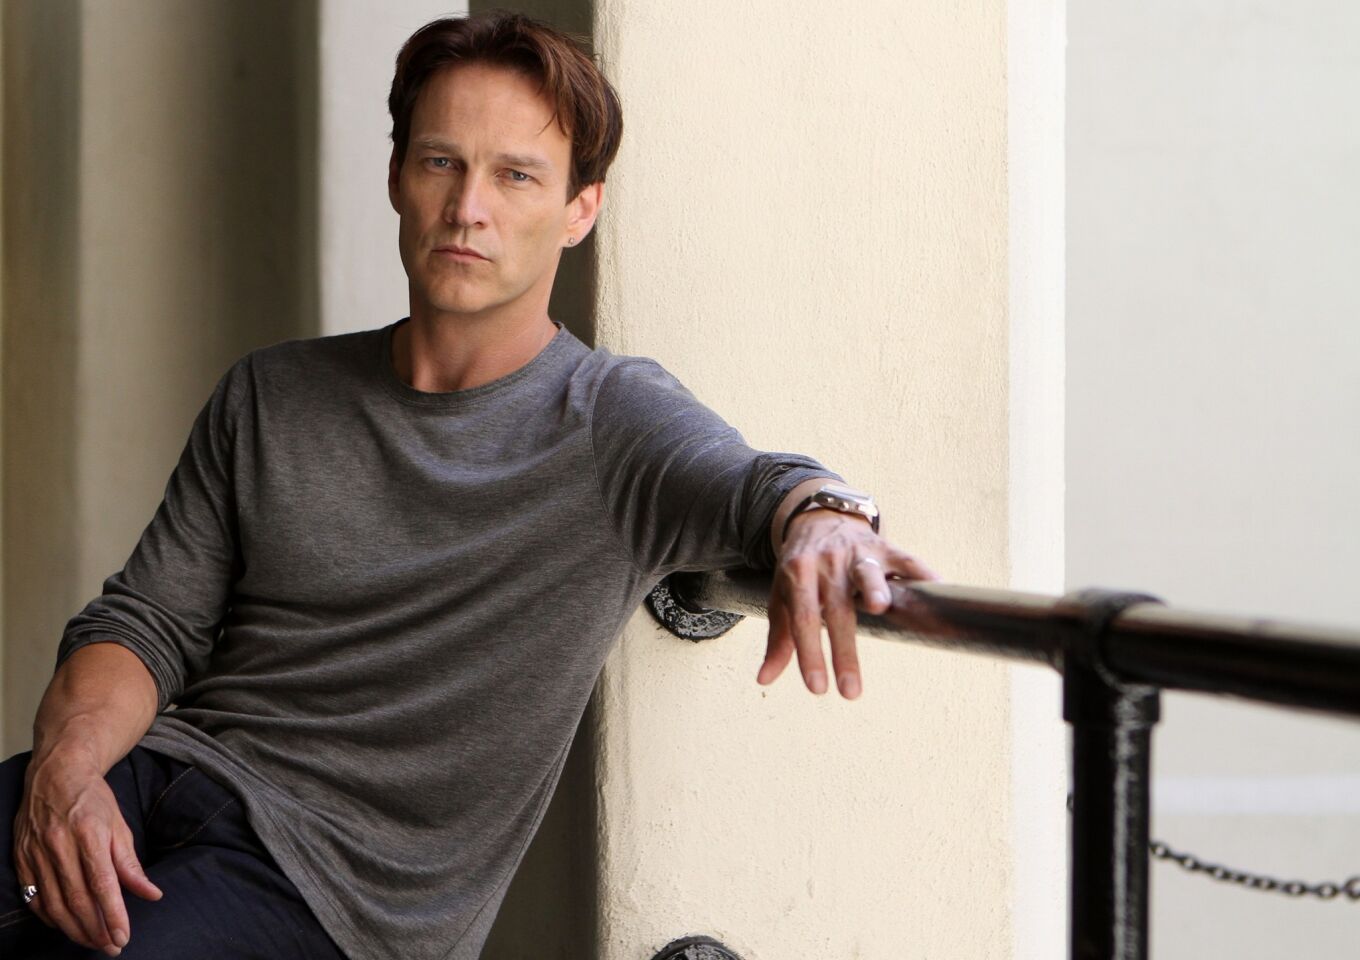 Stephen Moyer of the vampire series "True Blood" takes a role in the musical "Chicago" at the Hollywood Bowl.